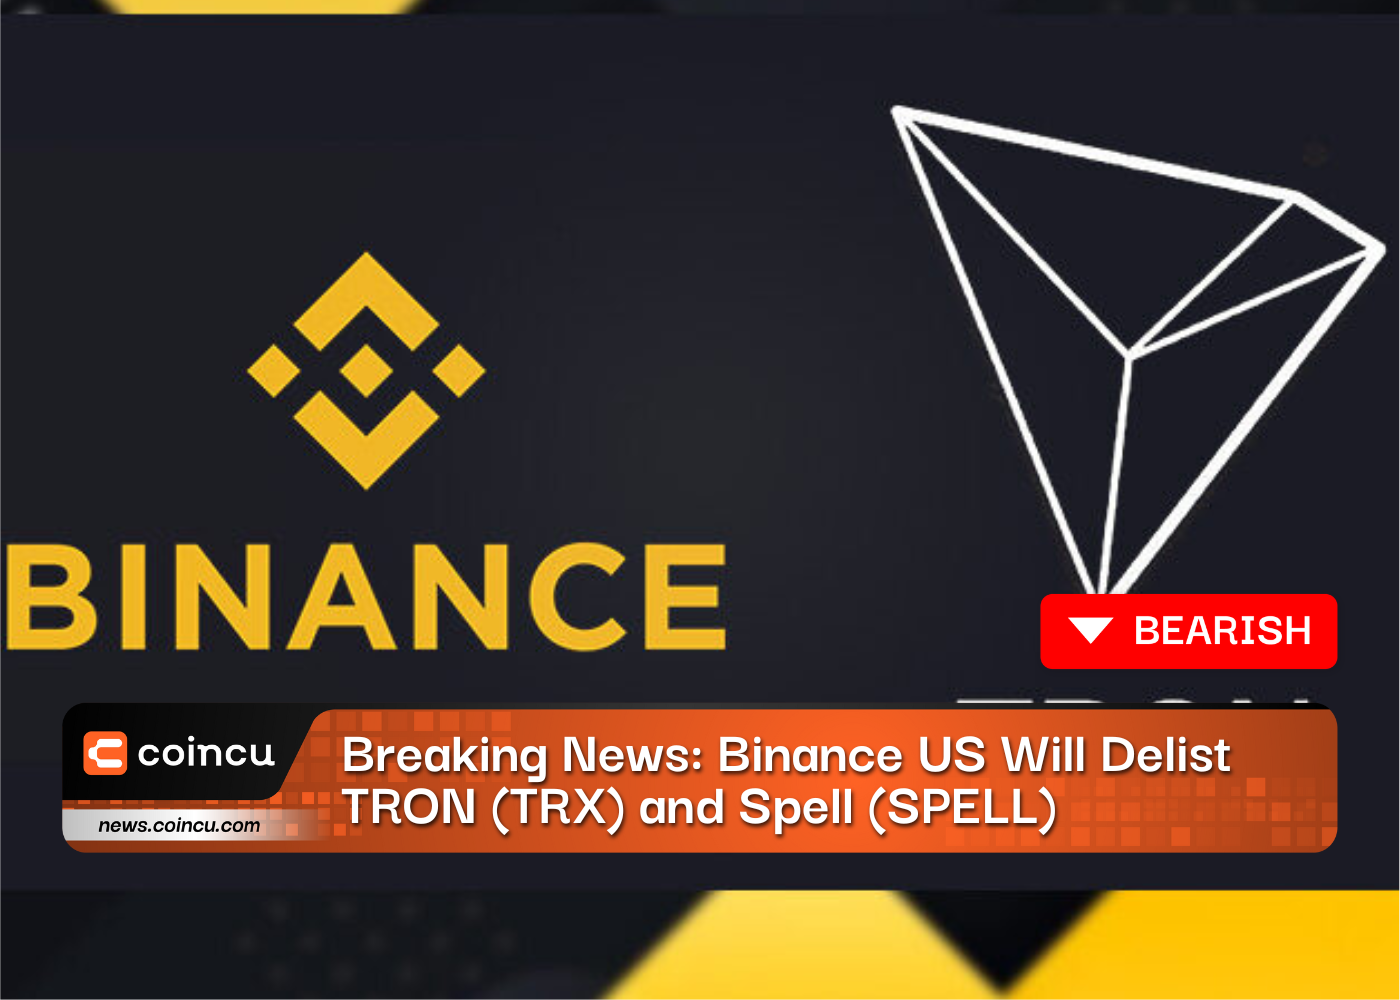 Breaking News: Binance US Will Delist TRON (TRX) and Spell (SPELL)